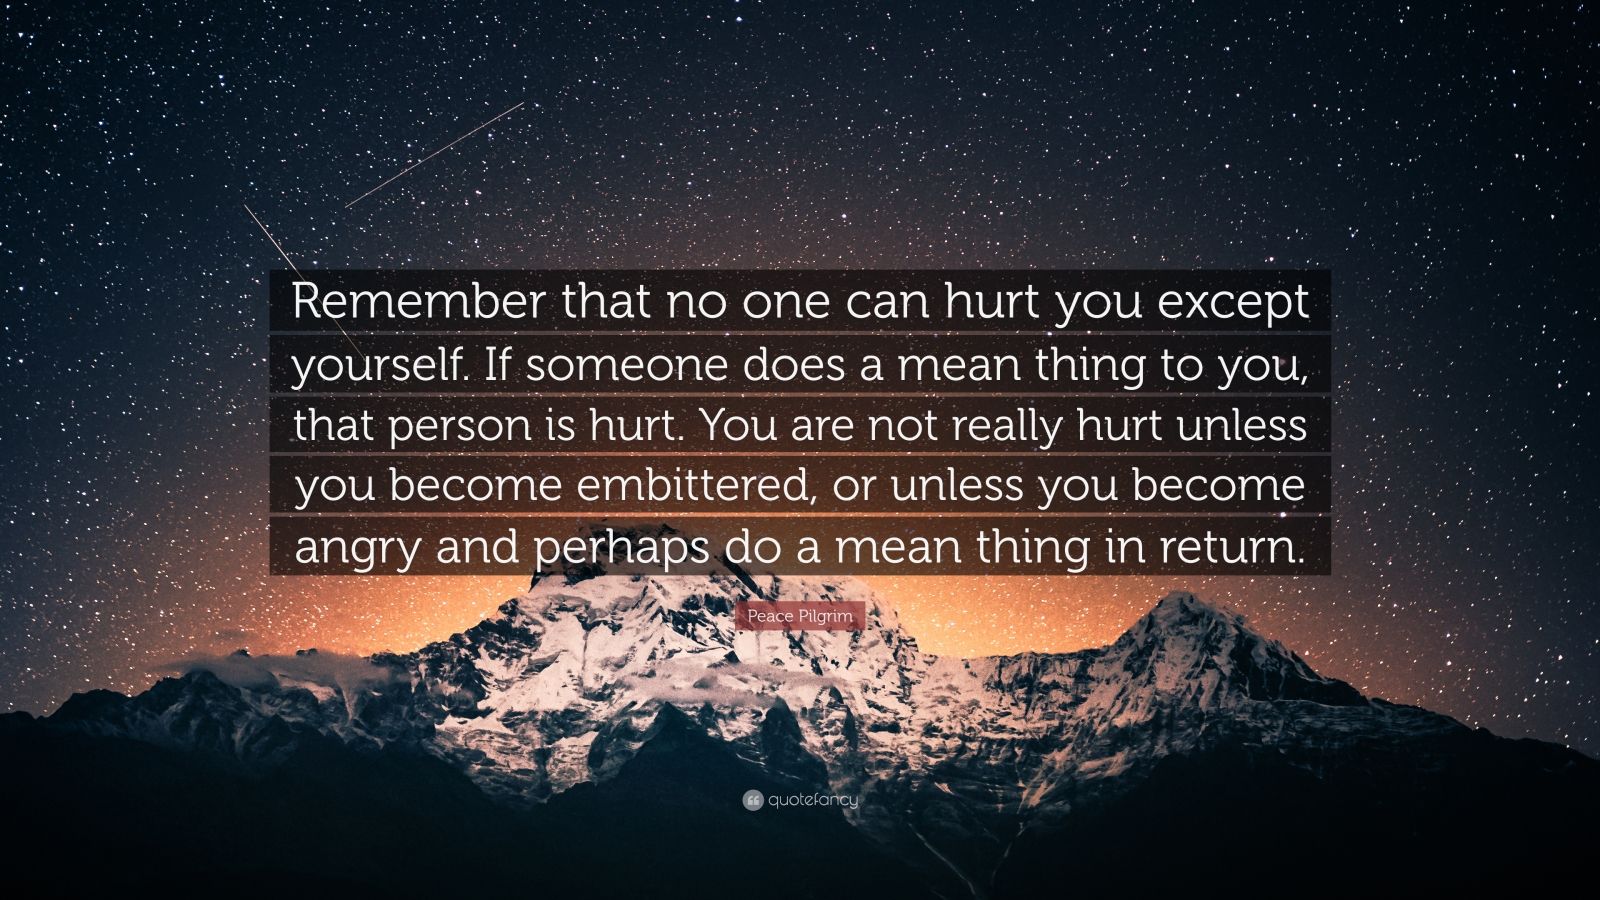 Peace Pilgrim Quote: “Remember that no one can hurt you except yourself